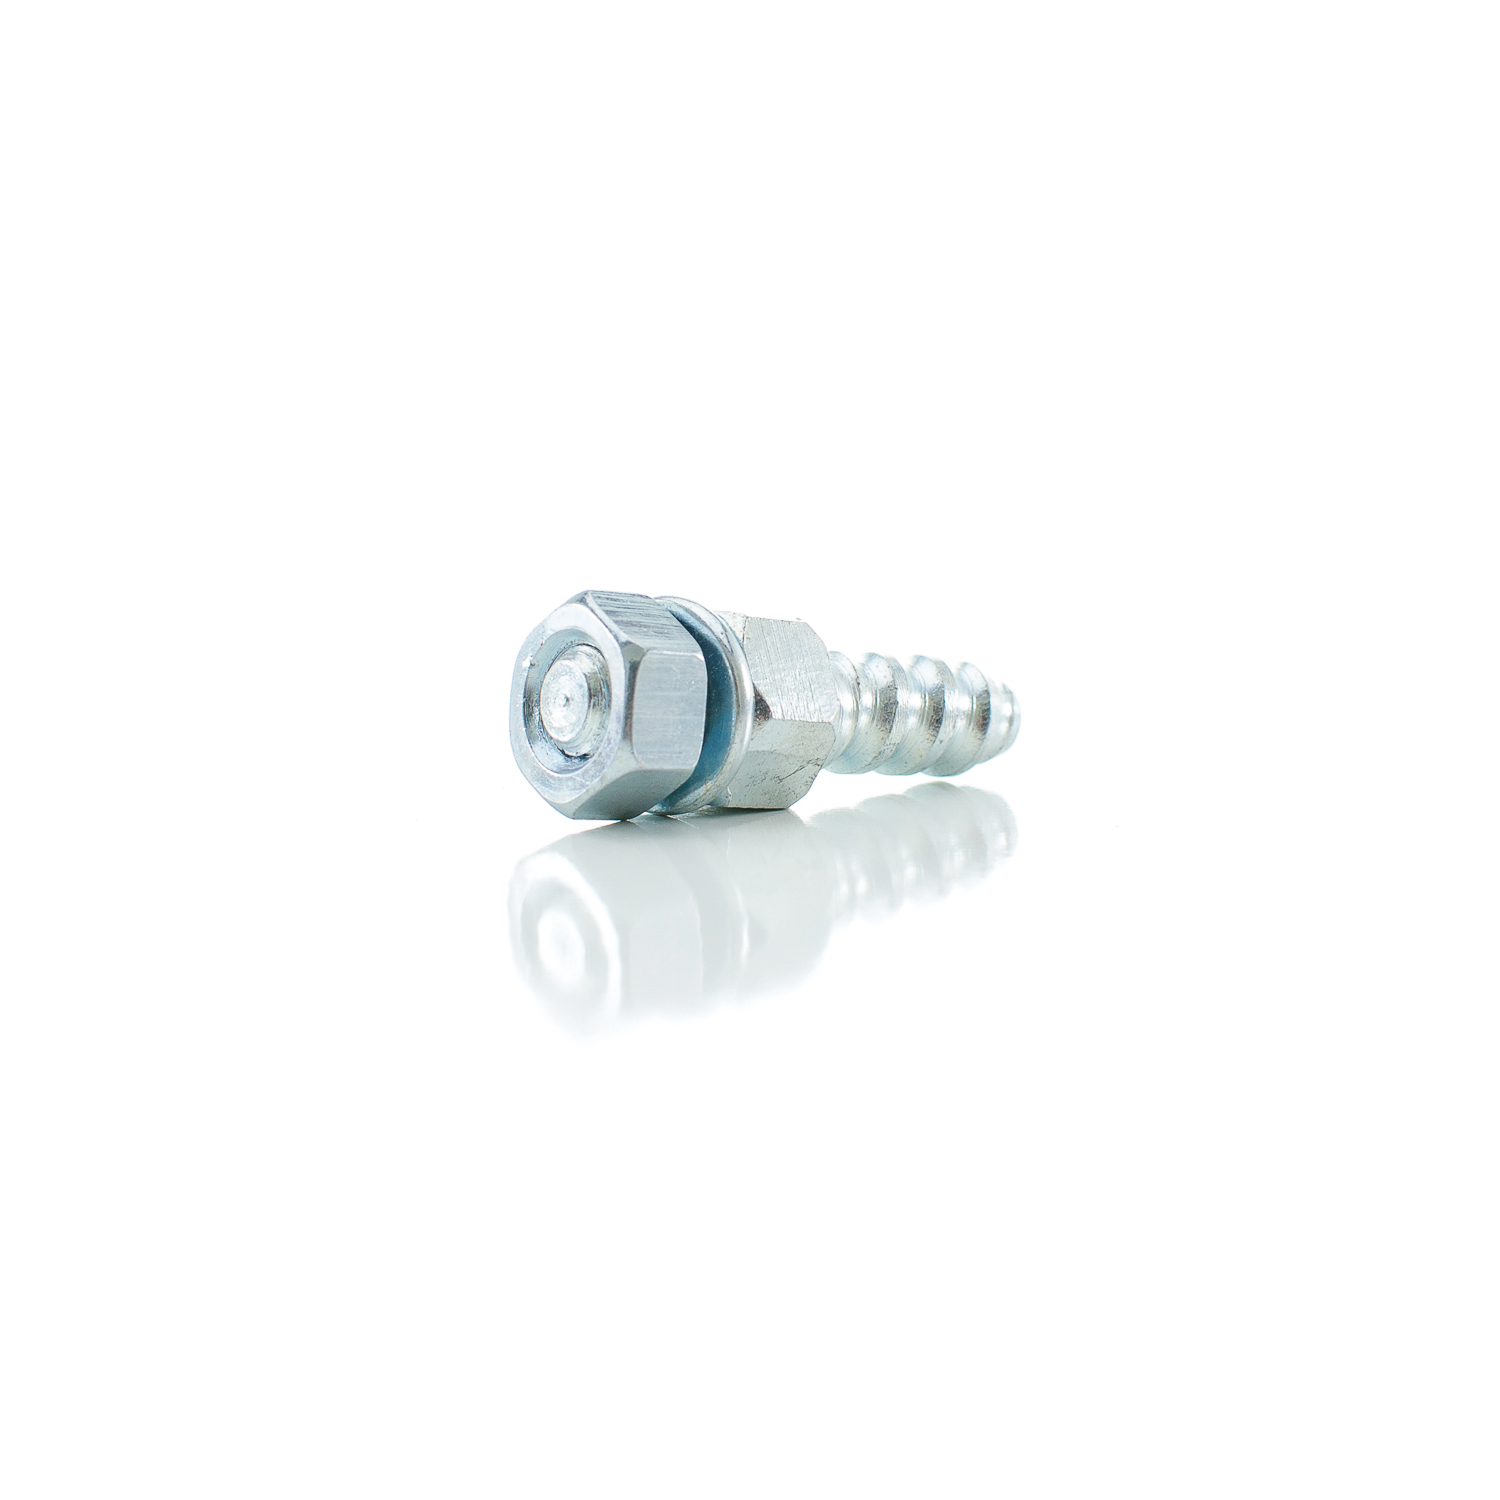 PASCO E03 Cable End Fitting, 1/2 in Cable, For Use With Blade Attachment